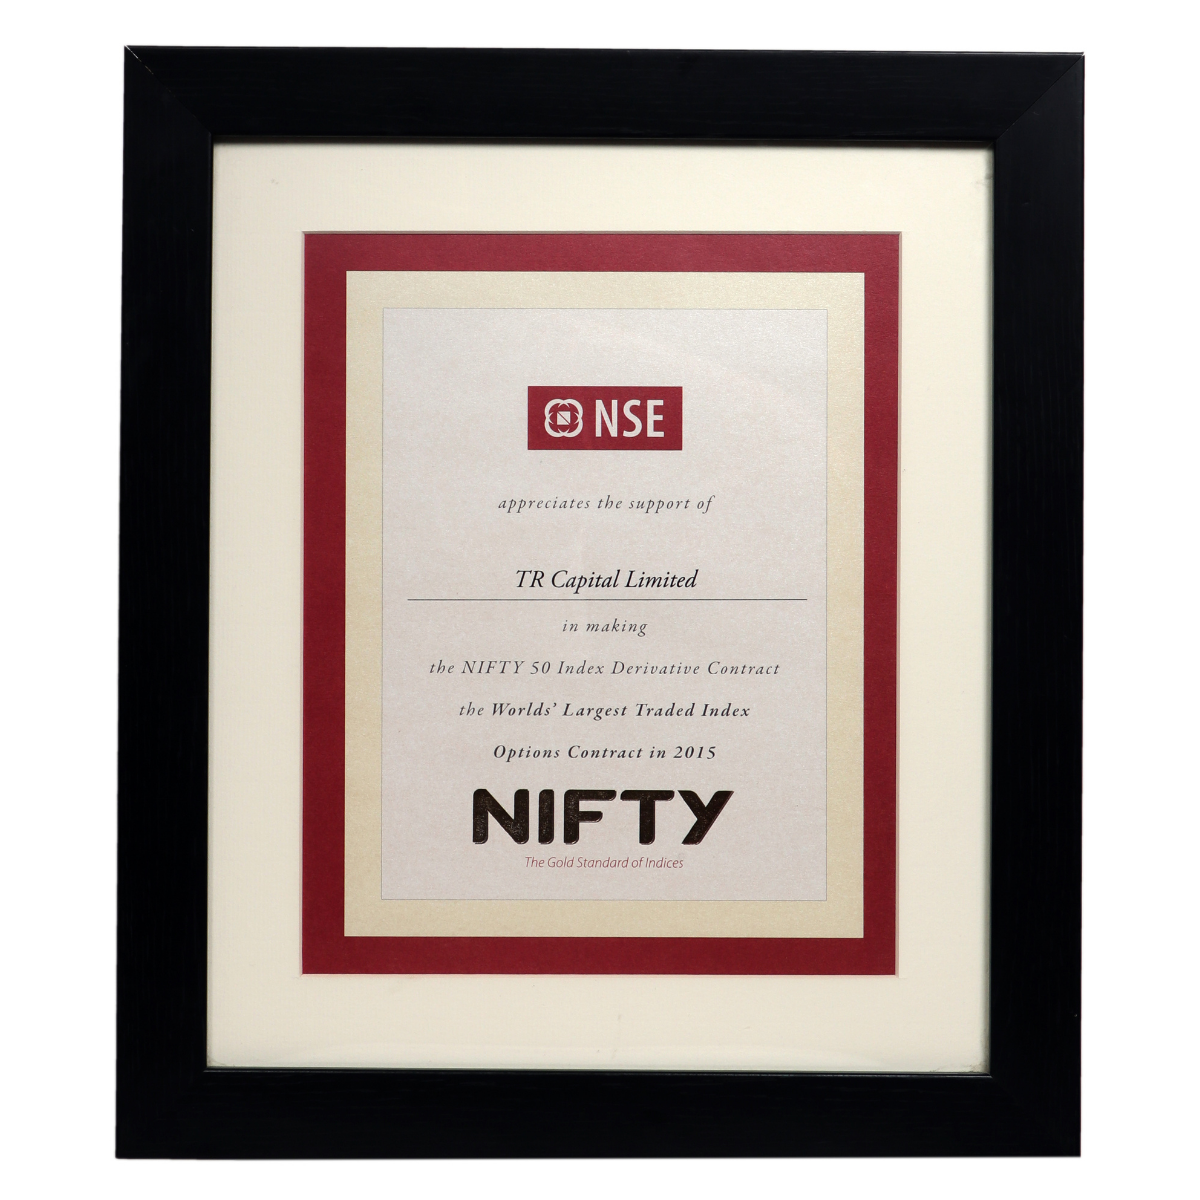 Certificate of Appreciation from NSE (2015)